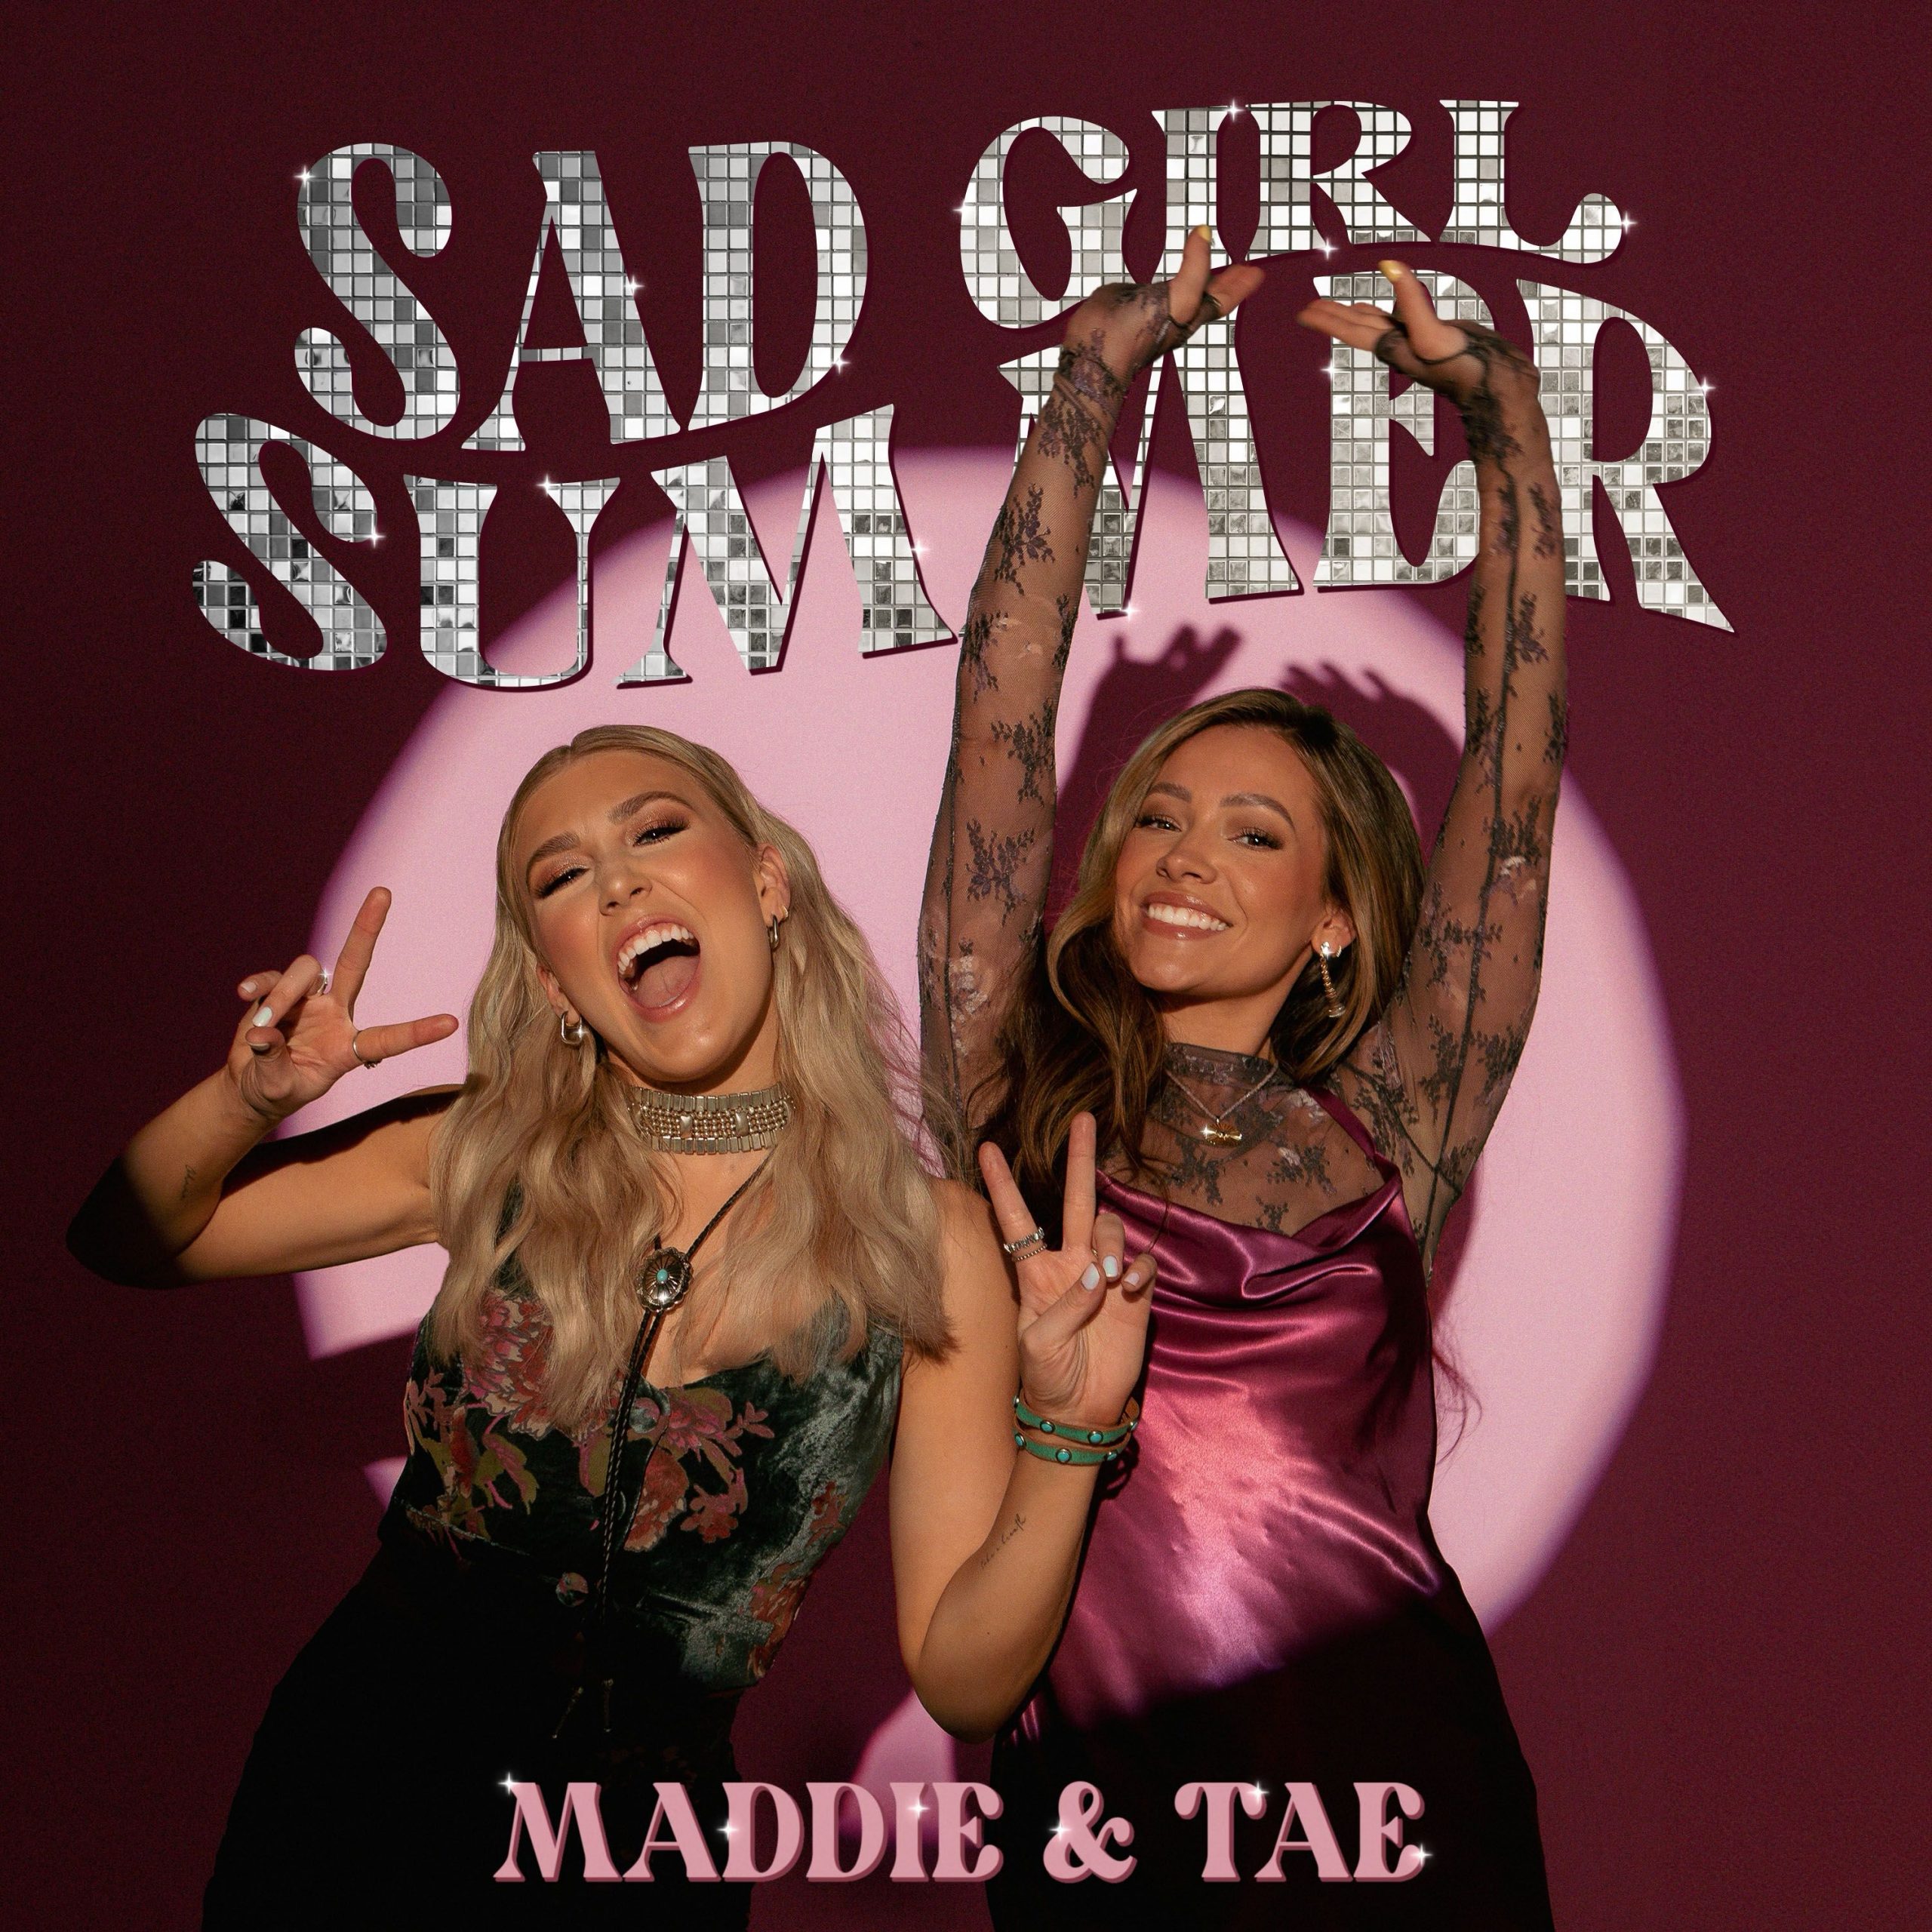 Maddie & Tae Heat Up “Sad Girl Summer” With New Track Out Now